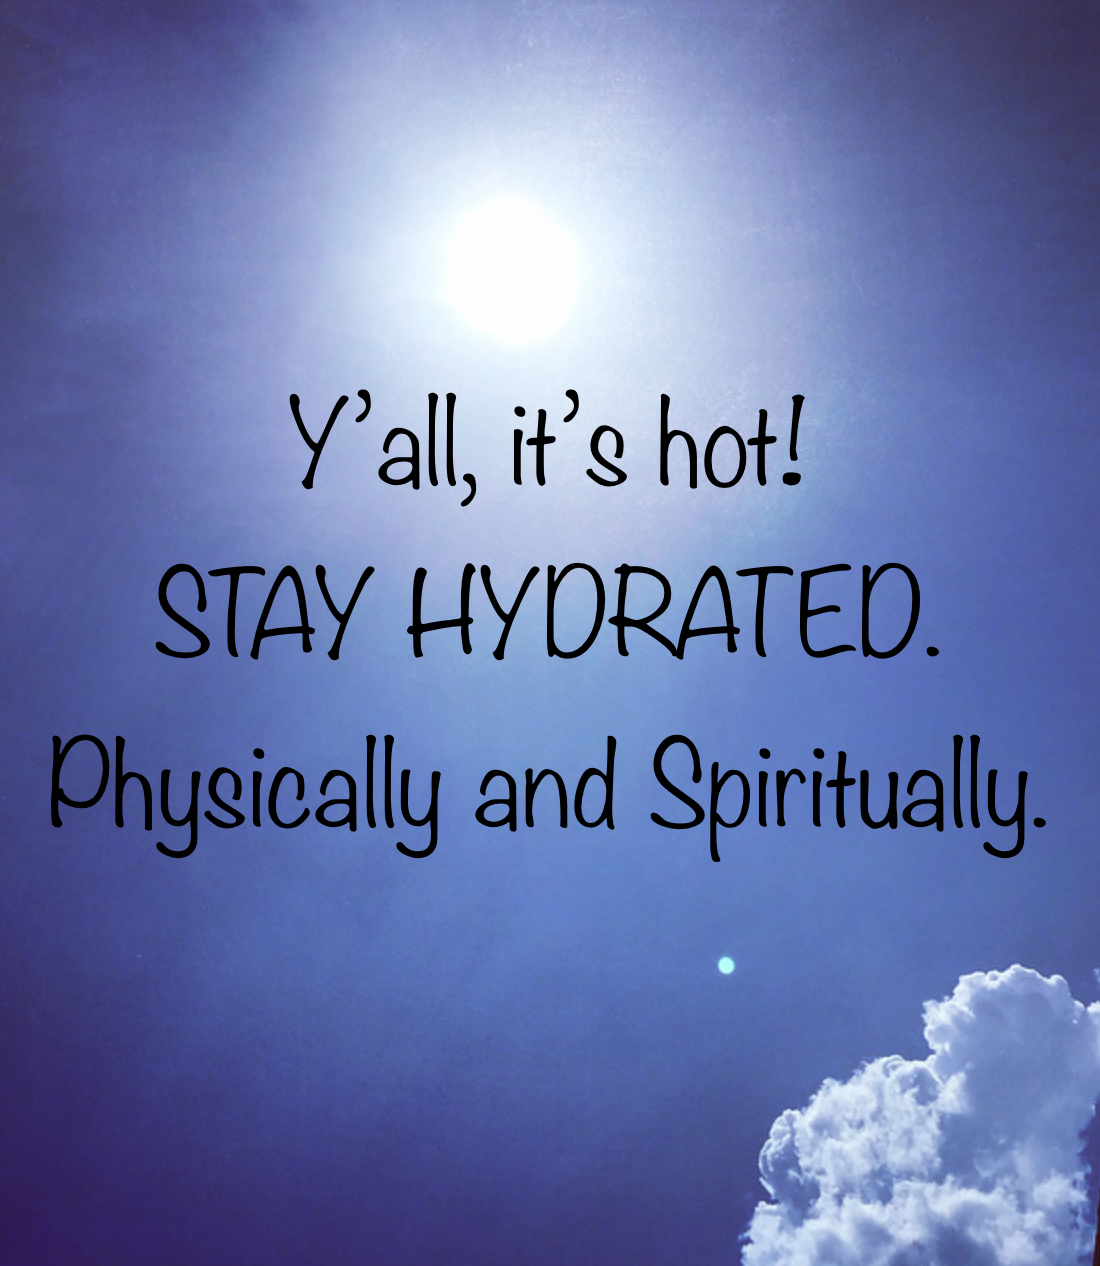 Motivational Monday: Stay Hydrated